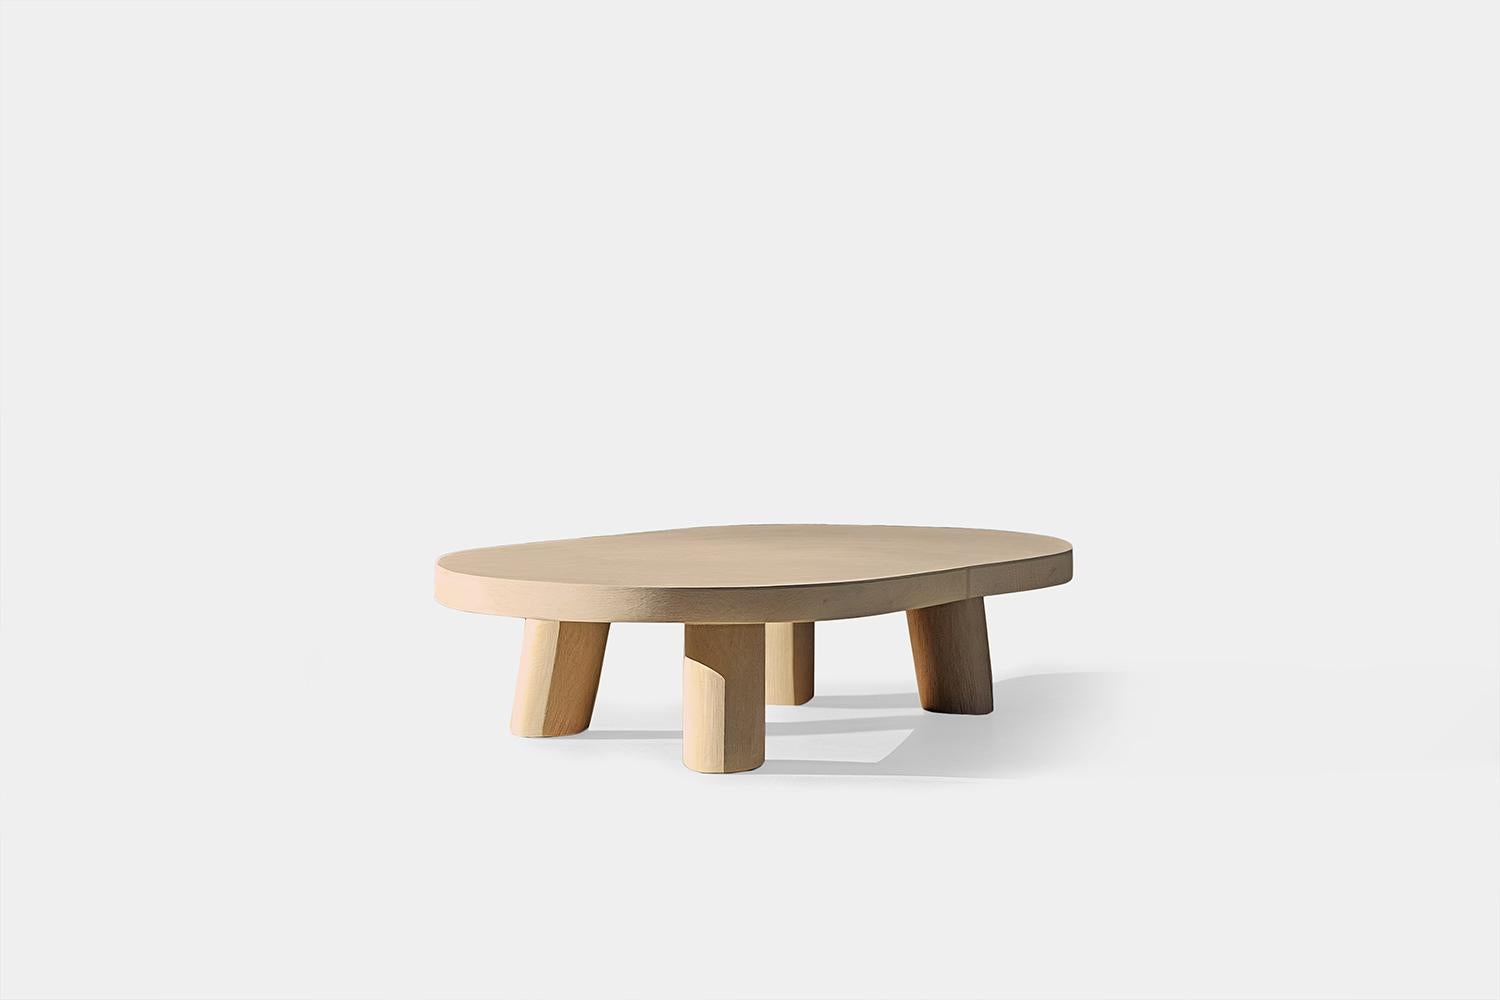 Minimalist Hand-Crafted Solid Wood Oak Asimetric Coffee Table by Nono For Sale